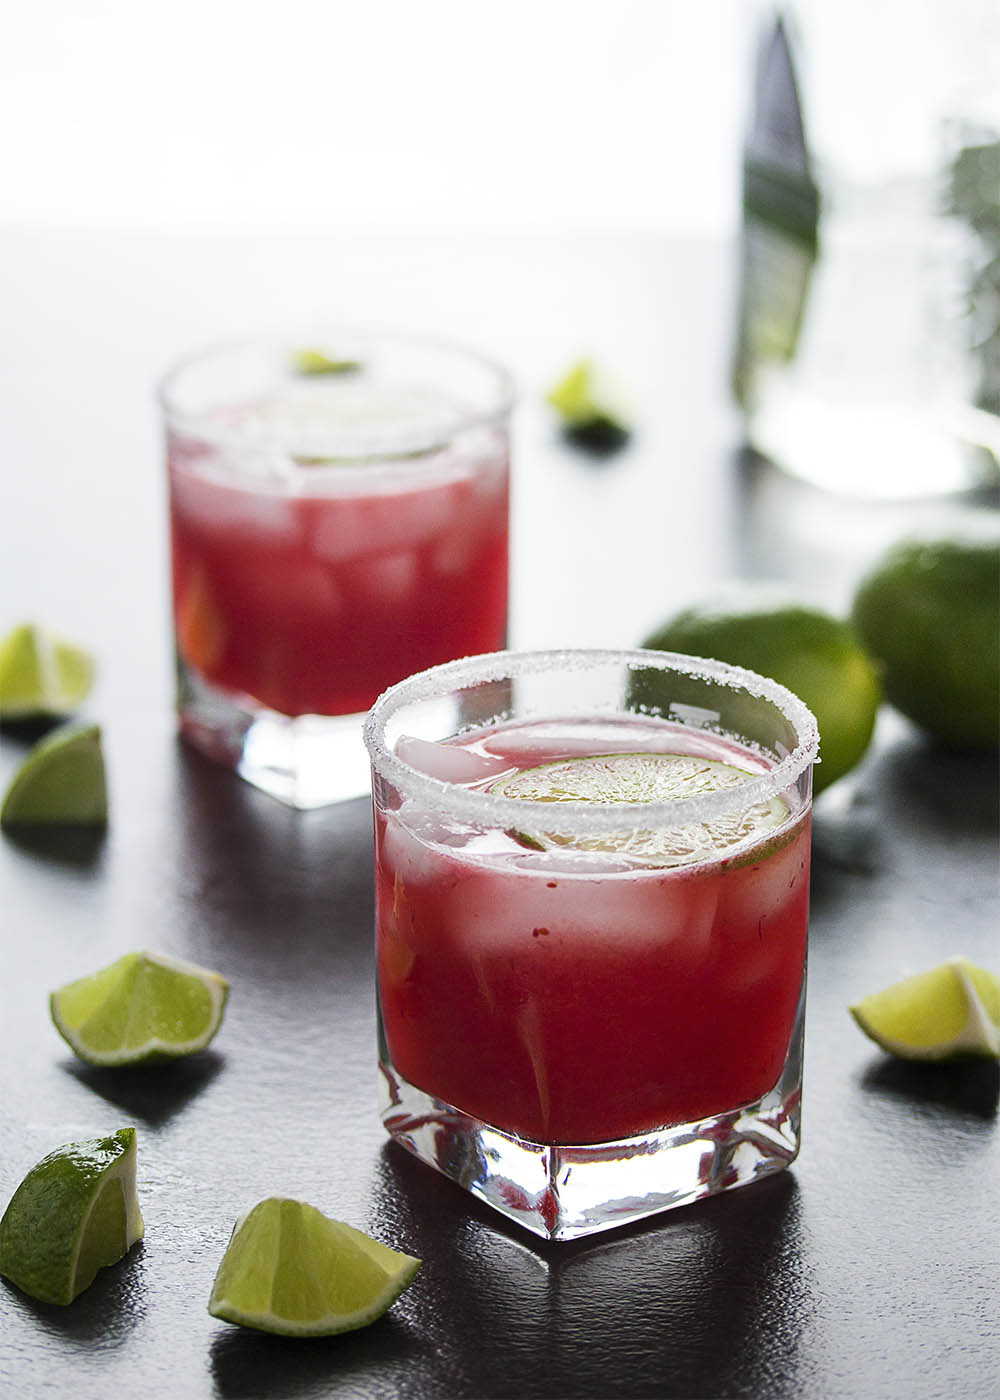 Fresh cranberry sauce is the secret to these intensely flavored tart-sweet fresh cranberry margaritas. Make them by the glass or in a pitcher for parties. | justalittlebitofbacon.com